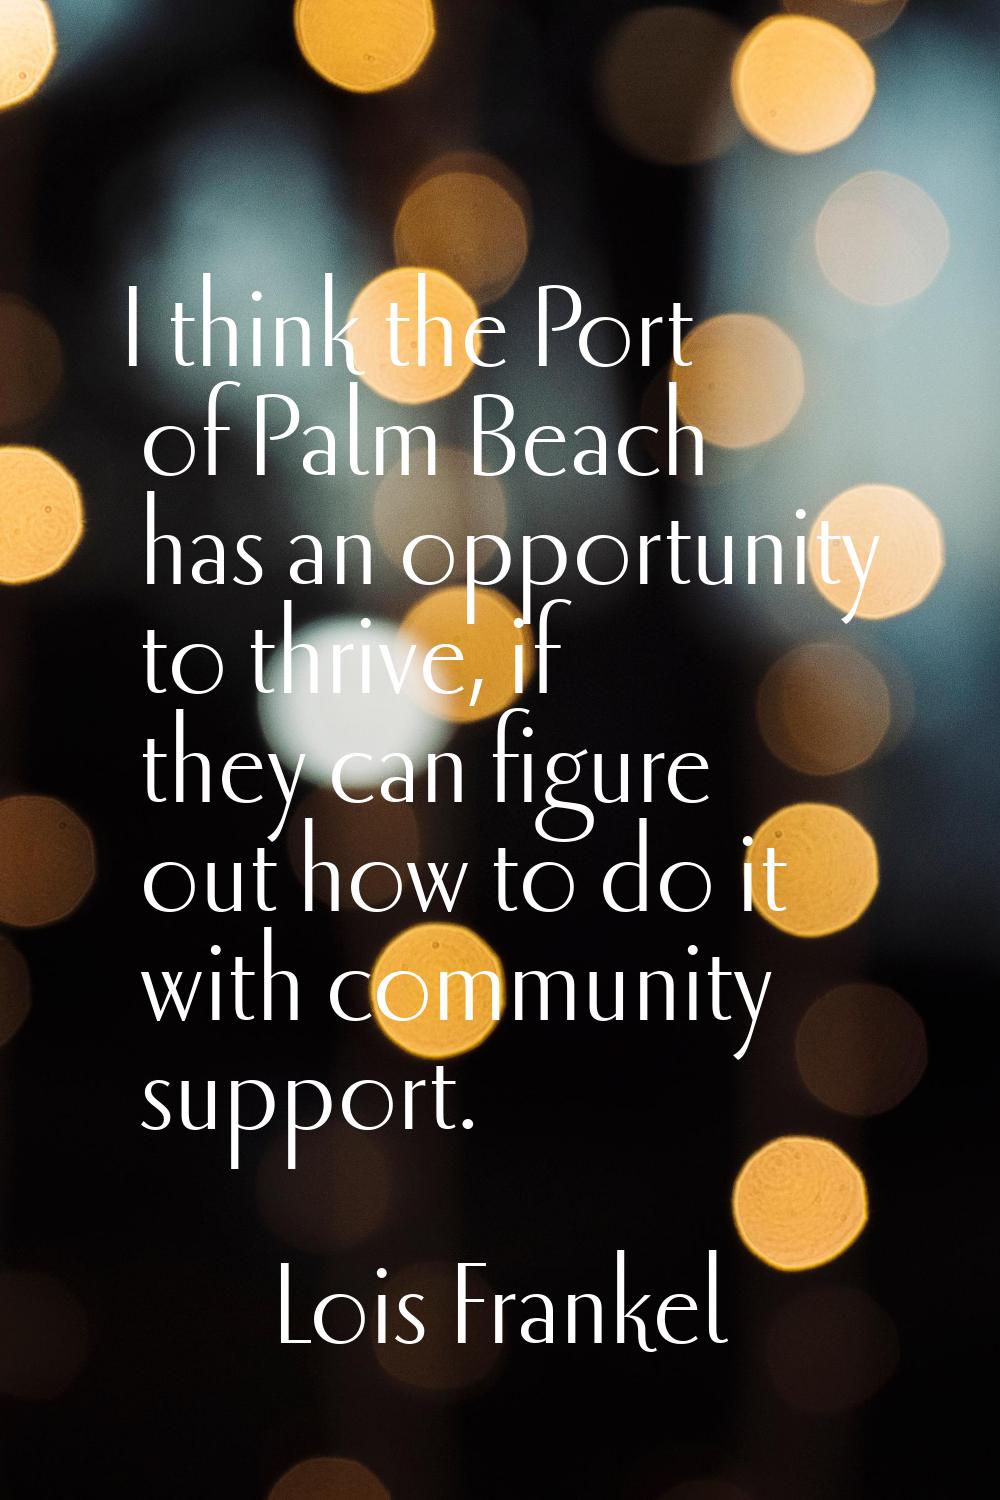 I think the Port of Palm Beach has an opportunity to thrive, if they can figure out how to do it wi